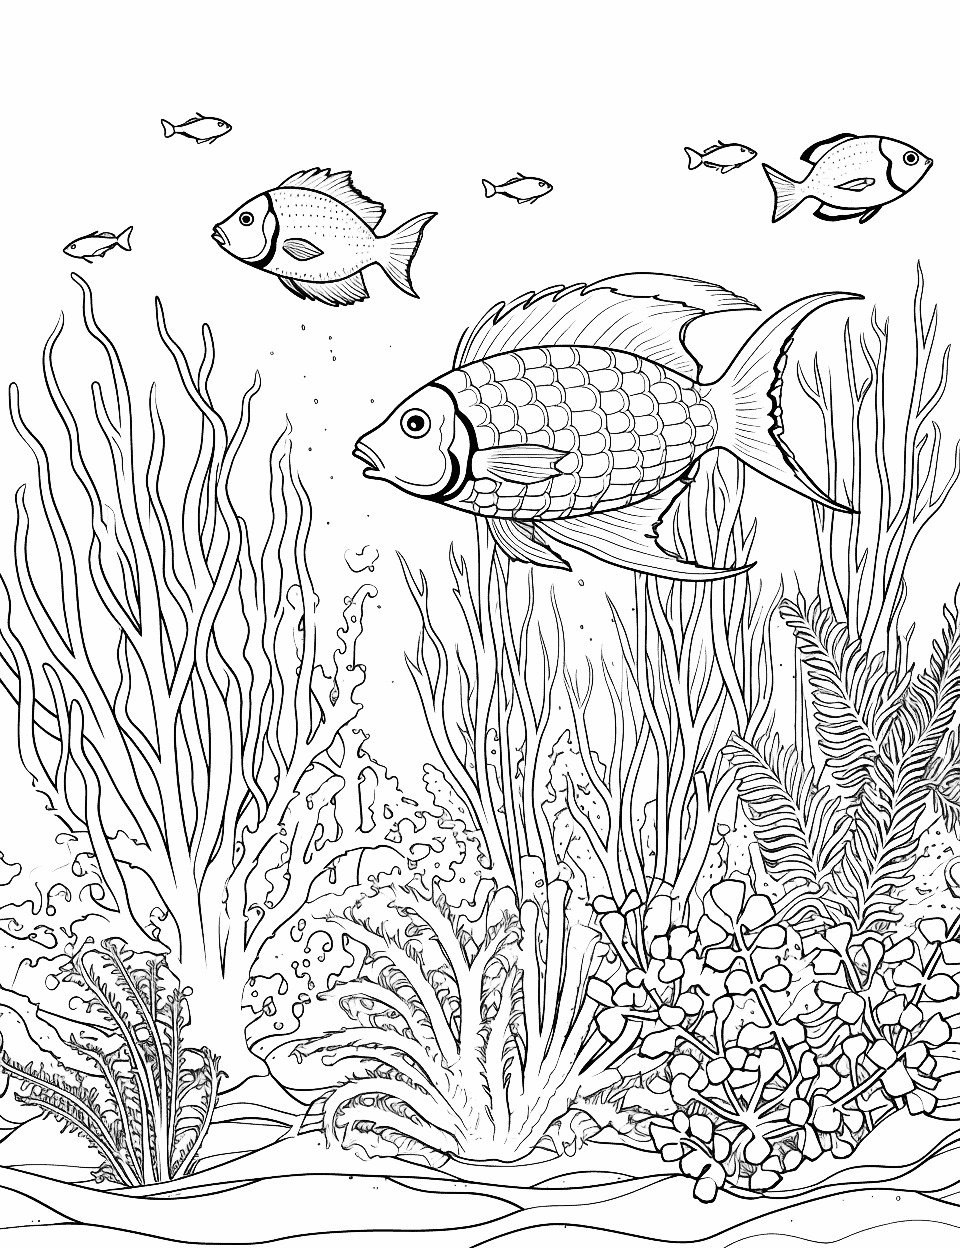 Fish's Coral Dance Adult Coloring Page - Fish weaving in and out of coral formations.